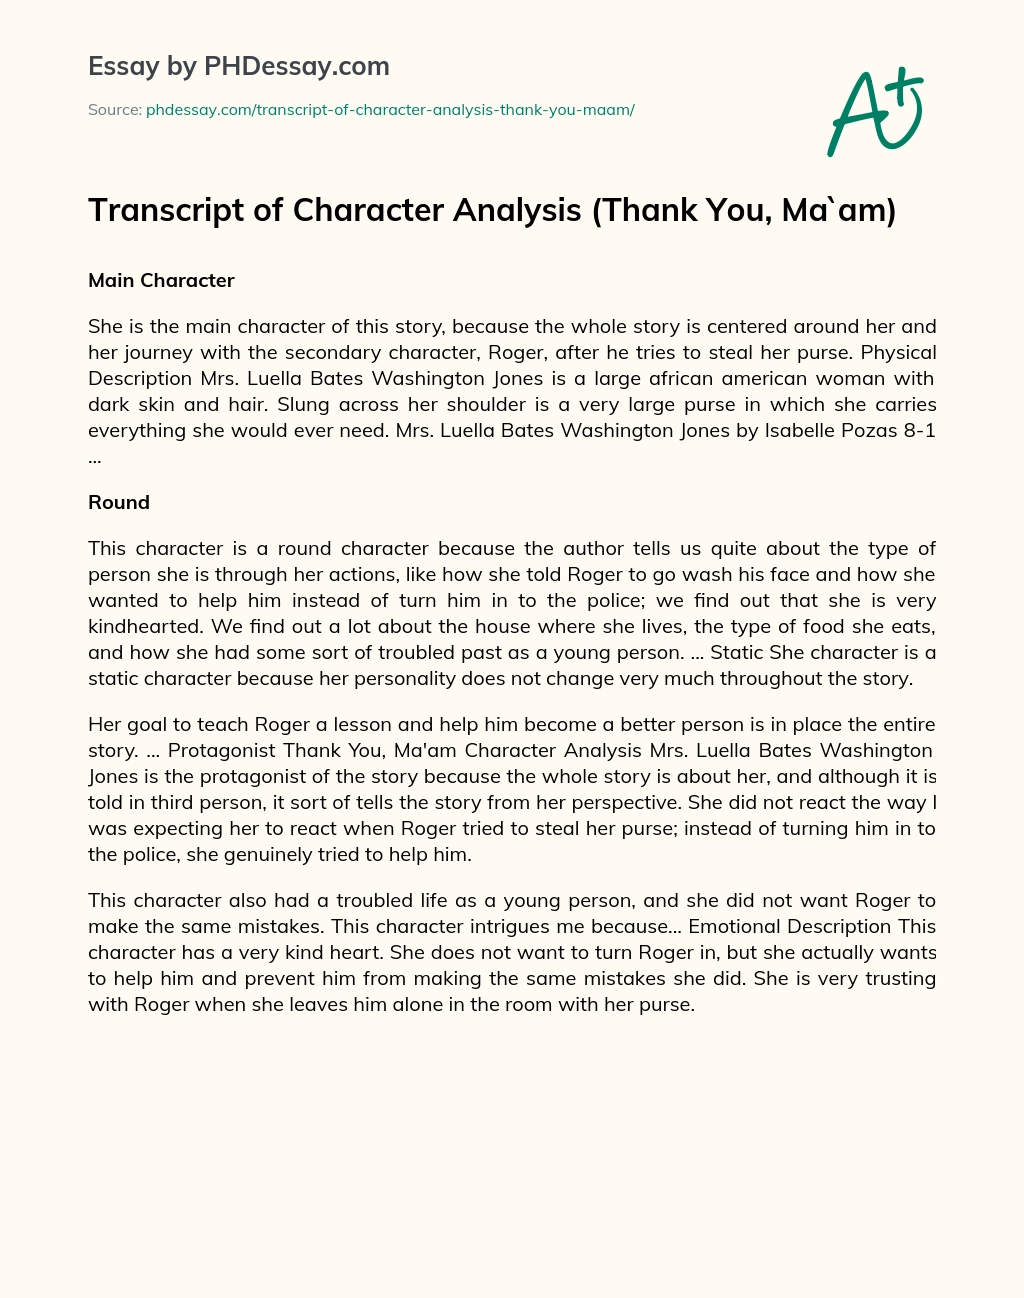 Transcript of Character Analysis (Thank You, Ma`am) essay